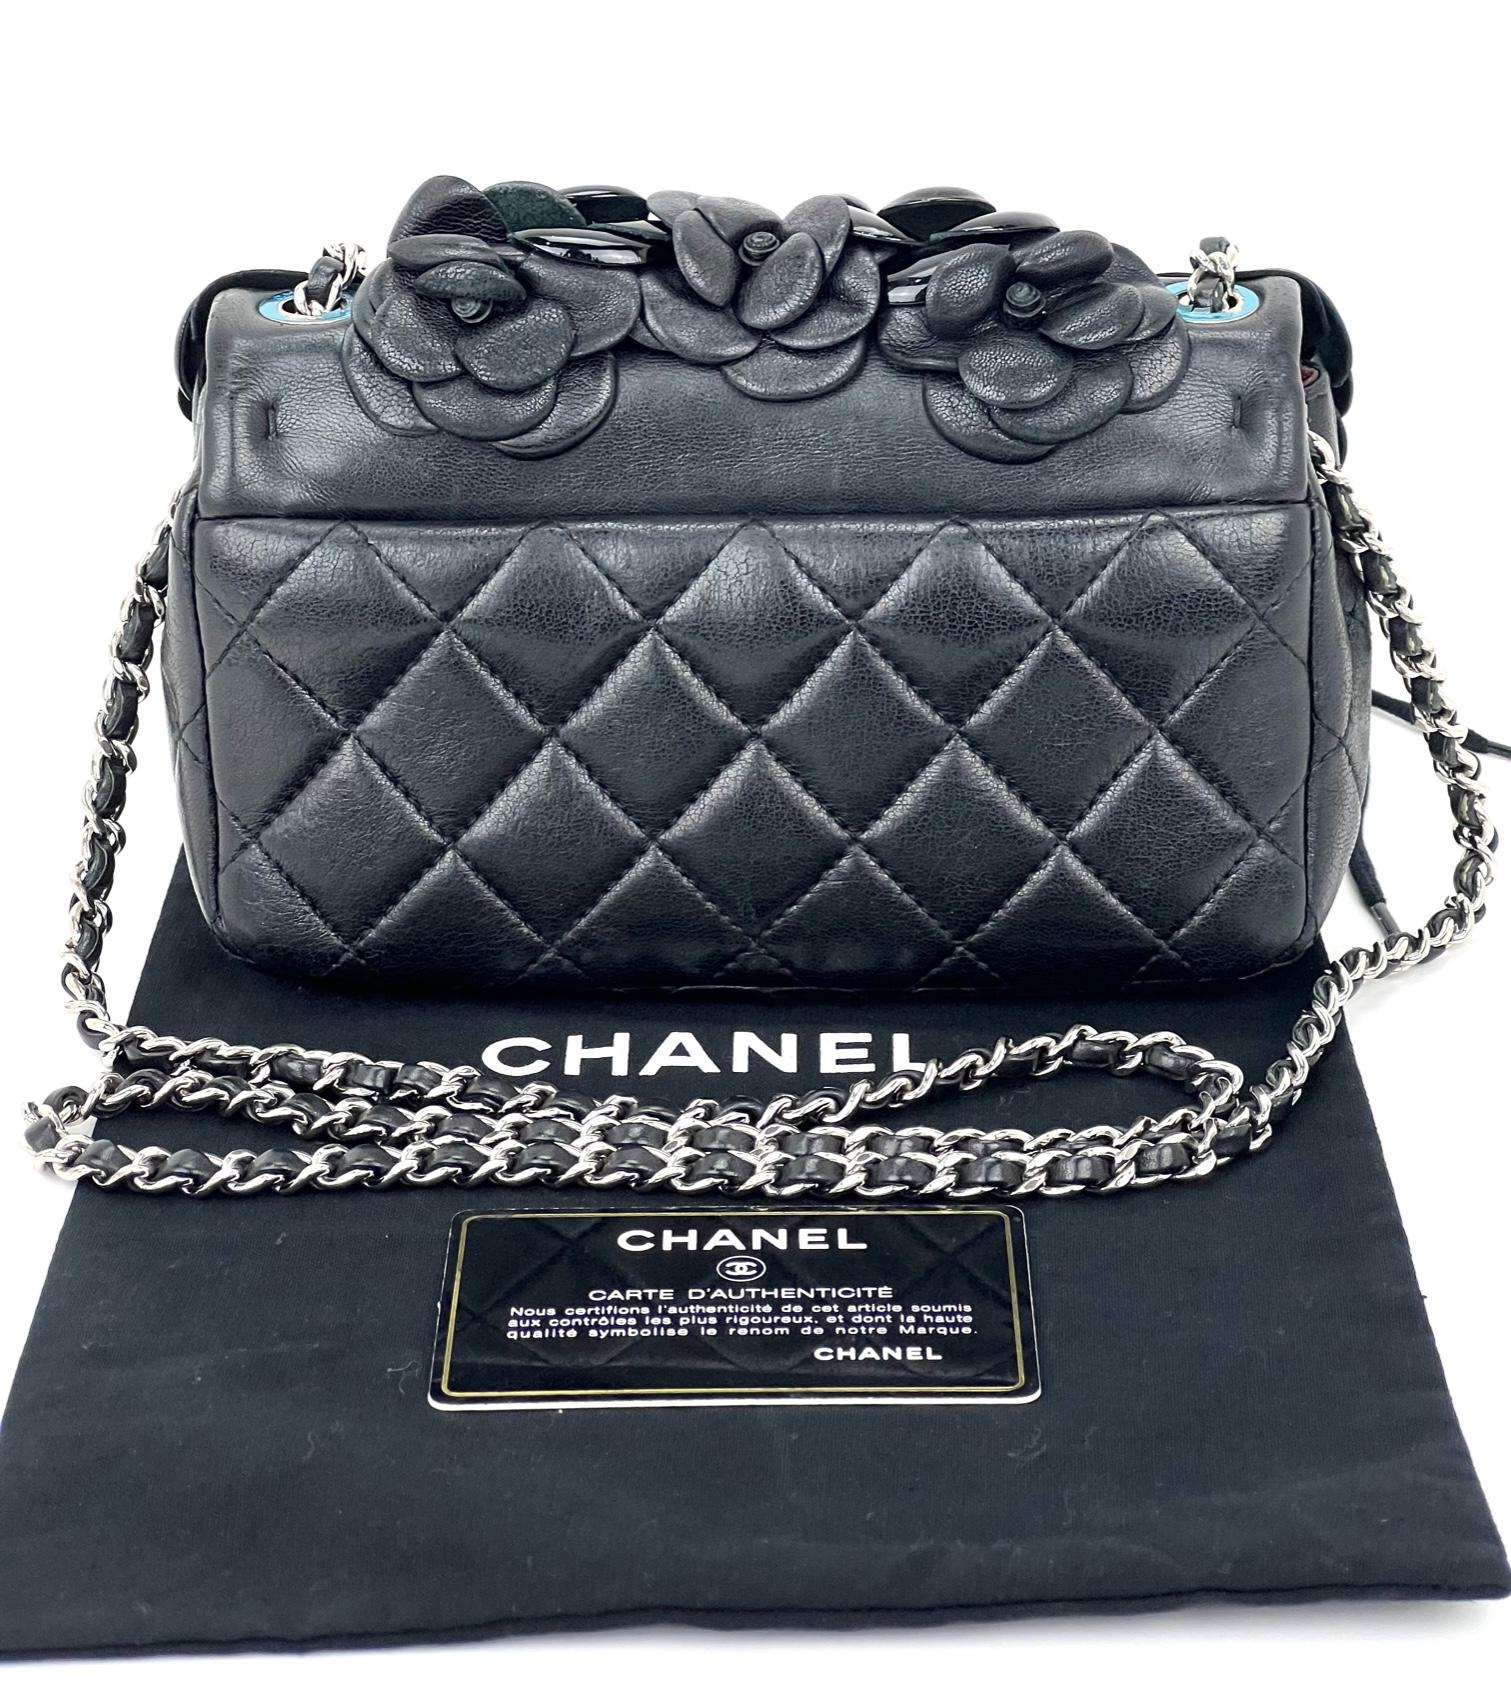 Pre-Owned  100% Authentic
CHANEL Lambskin Patent Around Camellia Flap Bag
Use as a Shoulder, Crossbody or Clutch
RATING: B...Very Good, well maintained, 
shows minor signs of wear
MATERIAL: lambskin, patent leather
STRAP: chain with leather